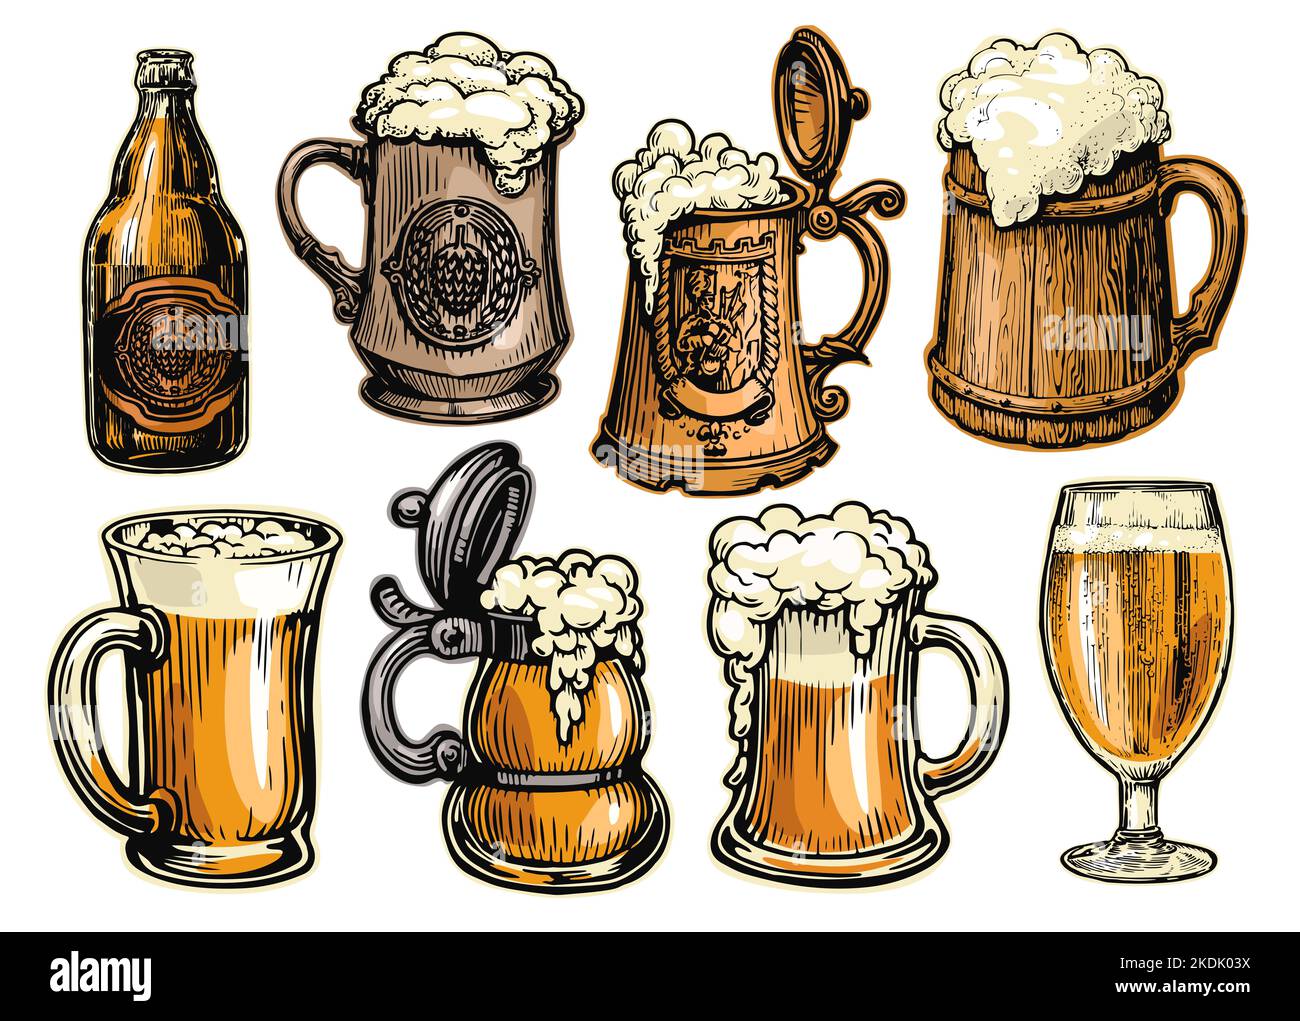 BEER set for restaurant or pub menu design. Alcoholic drinks. Hand drawn illustration in retro style Stock Photo